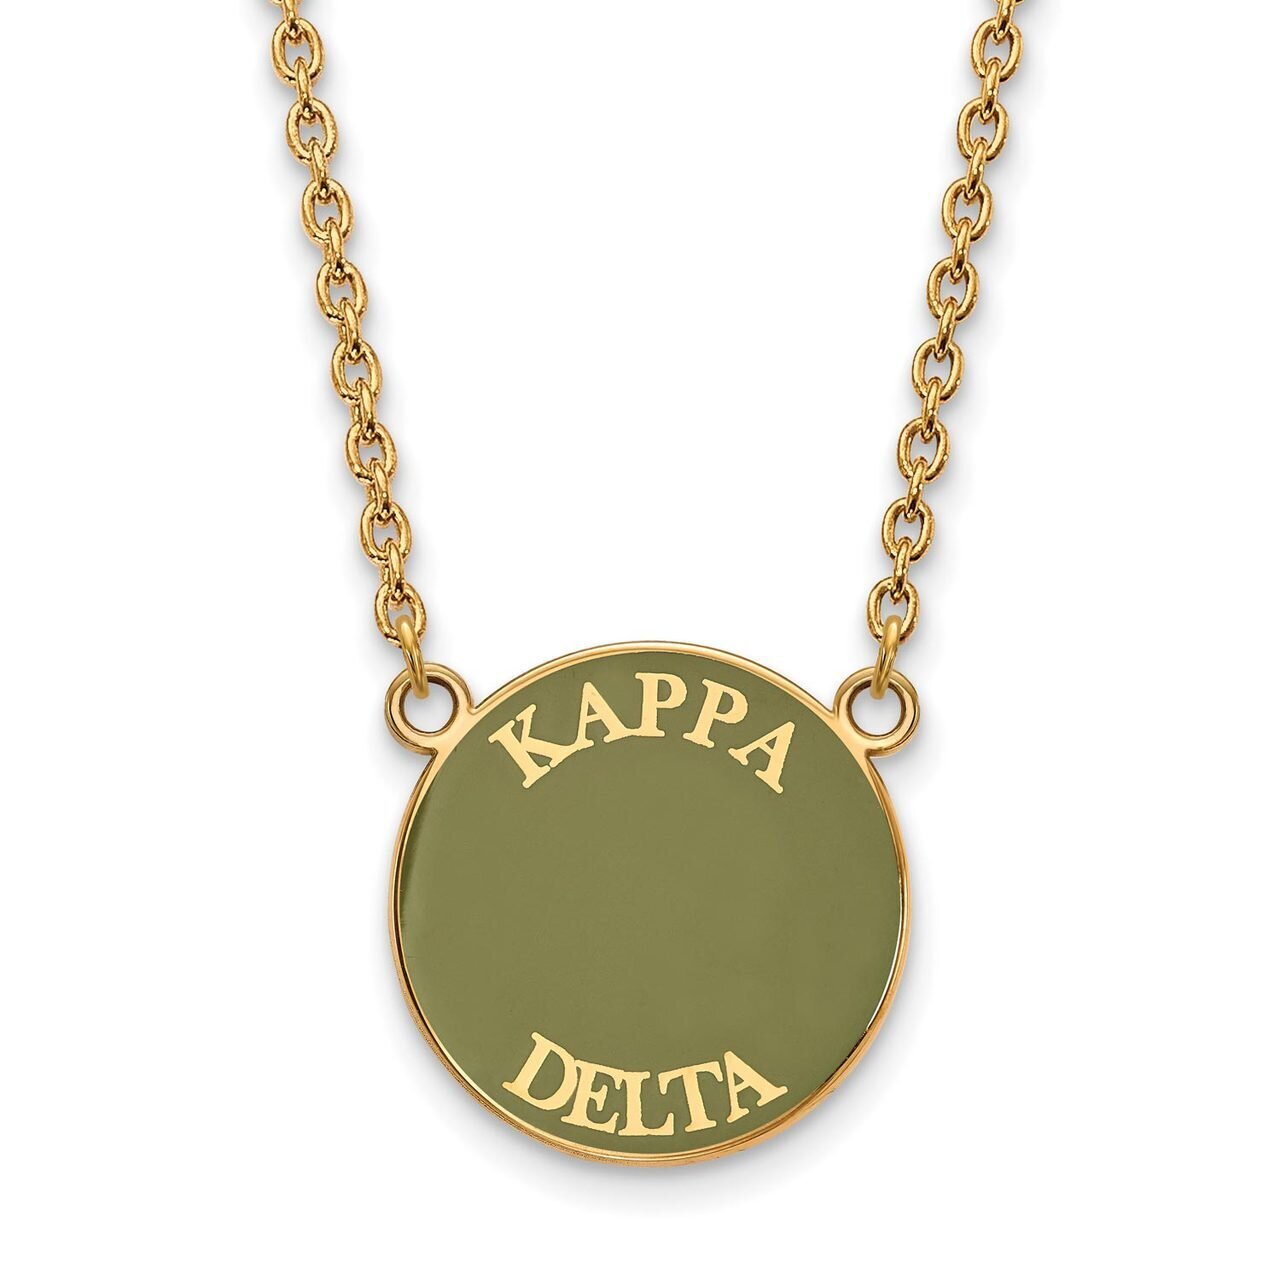 Kappa Delta Small Enameled Pendant with 18 Inch Chain Gold-plated Silver GP013KD-18